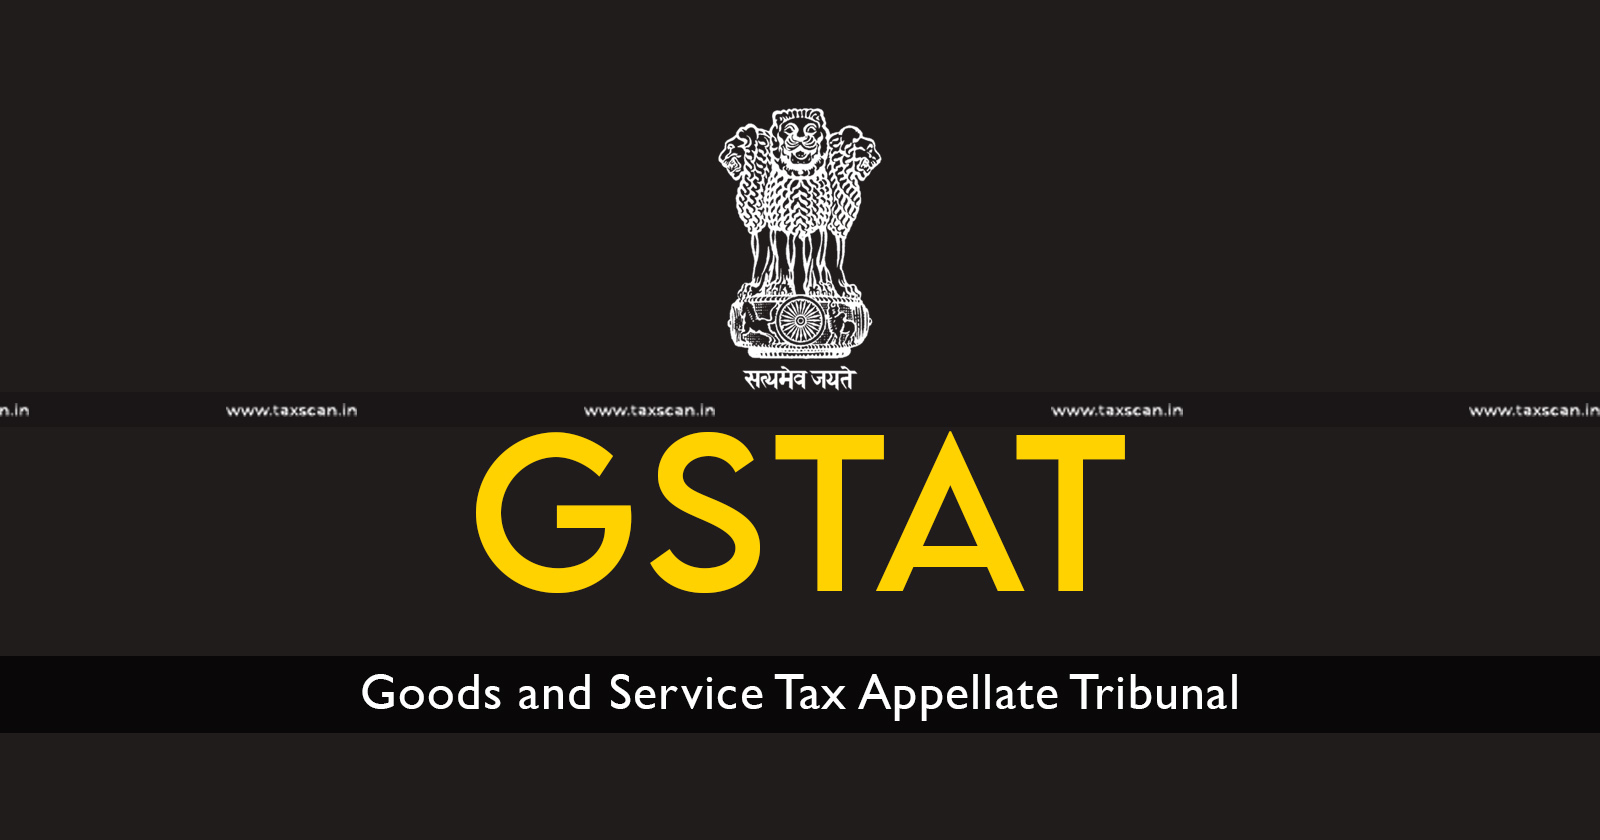 GSTAT Recruitment - Finance Ministry - Applications for Post of Tribunal Members - TAXSCAN